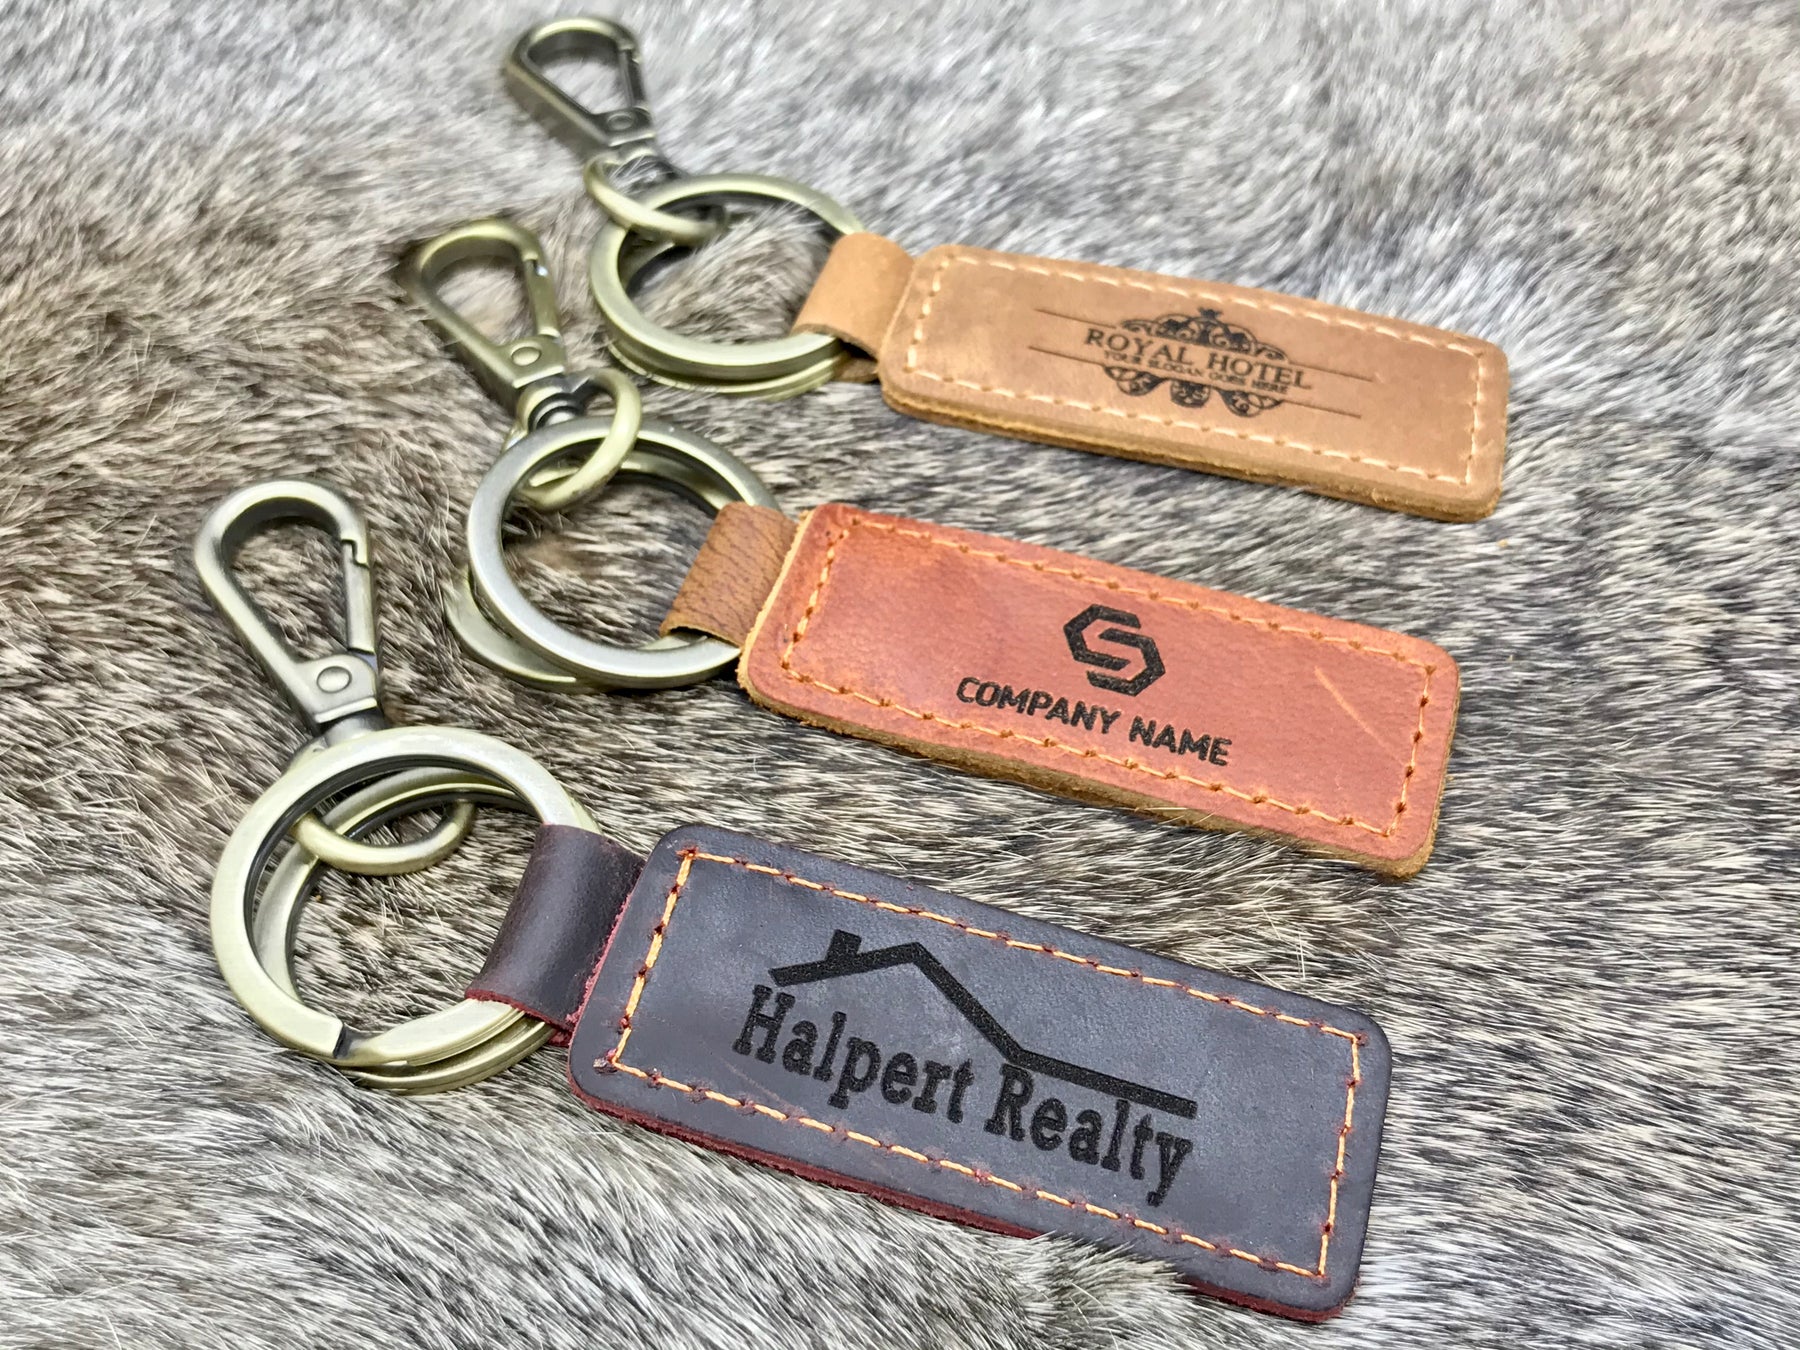 PitkaLeather 10 Pack Blank Leather Keychains Kit| Laser Engraving, Foil stamping-Fundraising Ideas-Promotional, Business, Personalized Gifts